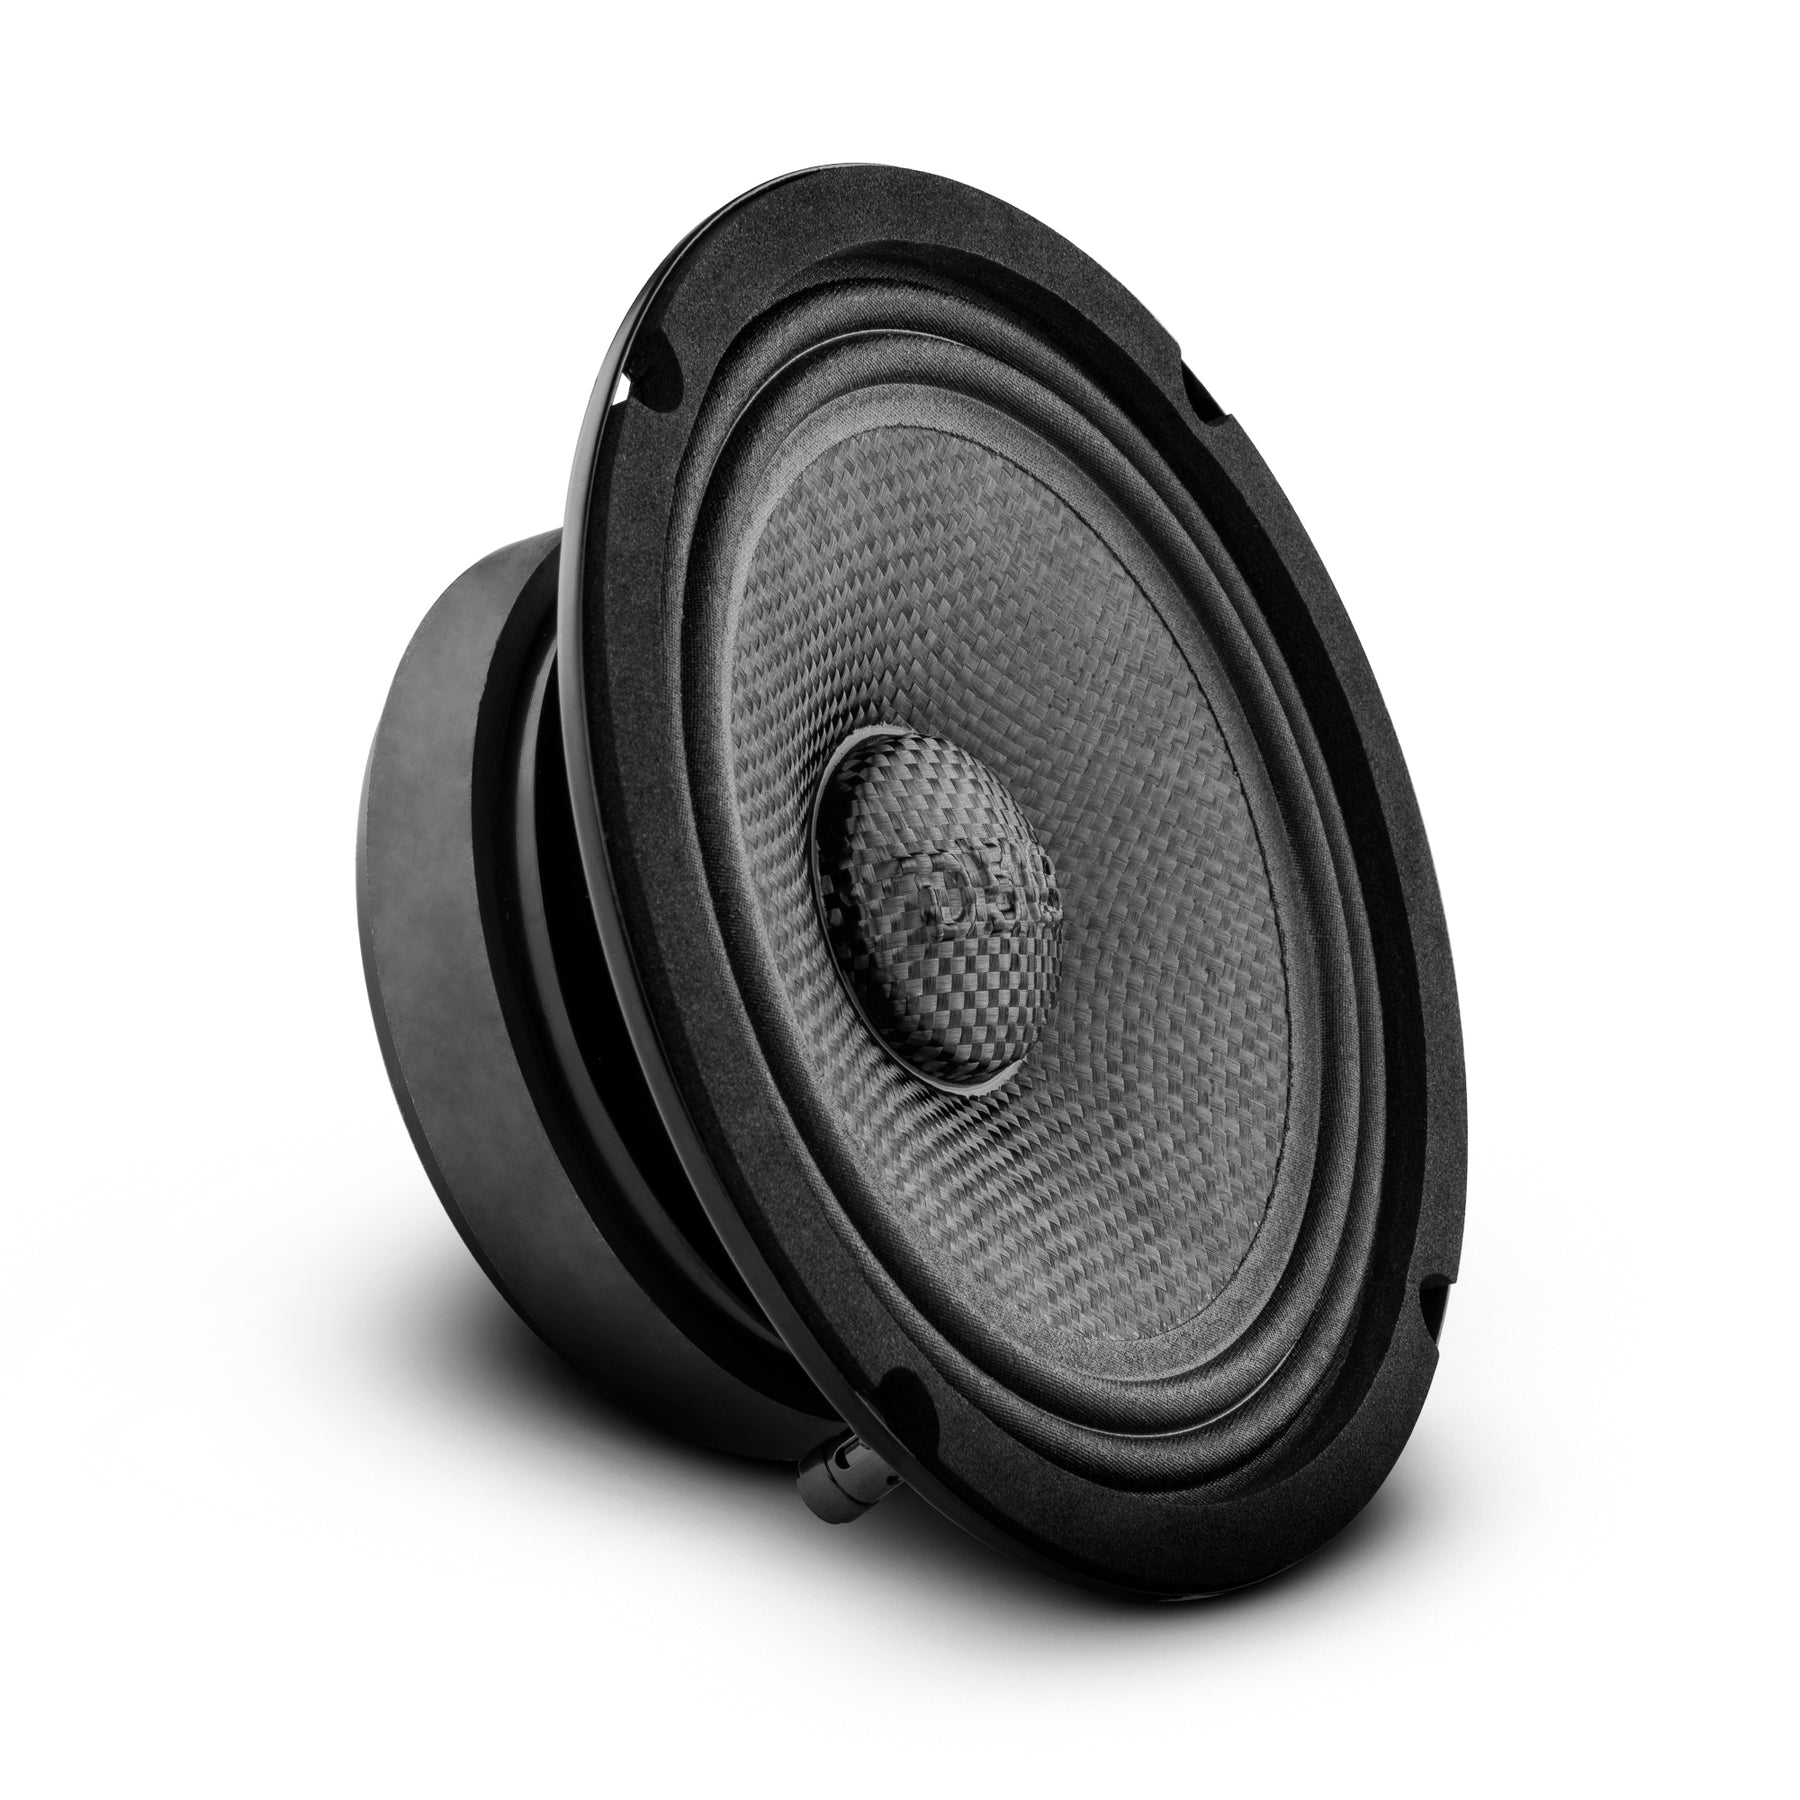 PRO 6.5" Shallow Carbon Fiber Water resistant Cone Mid-Bass Loudspeaker 250 Watts Rms 4-Ohm